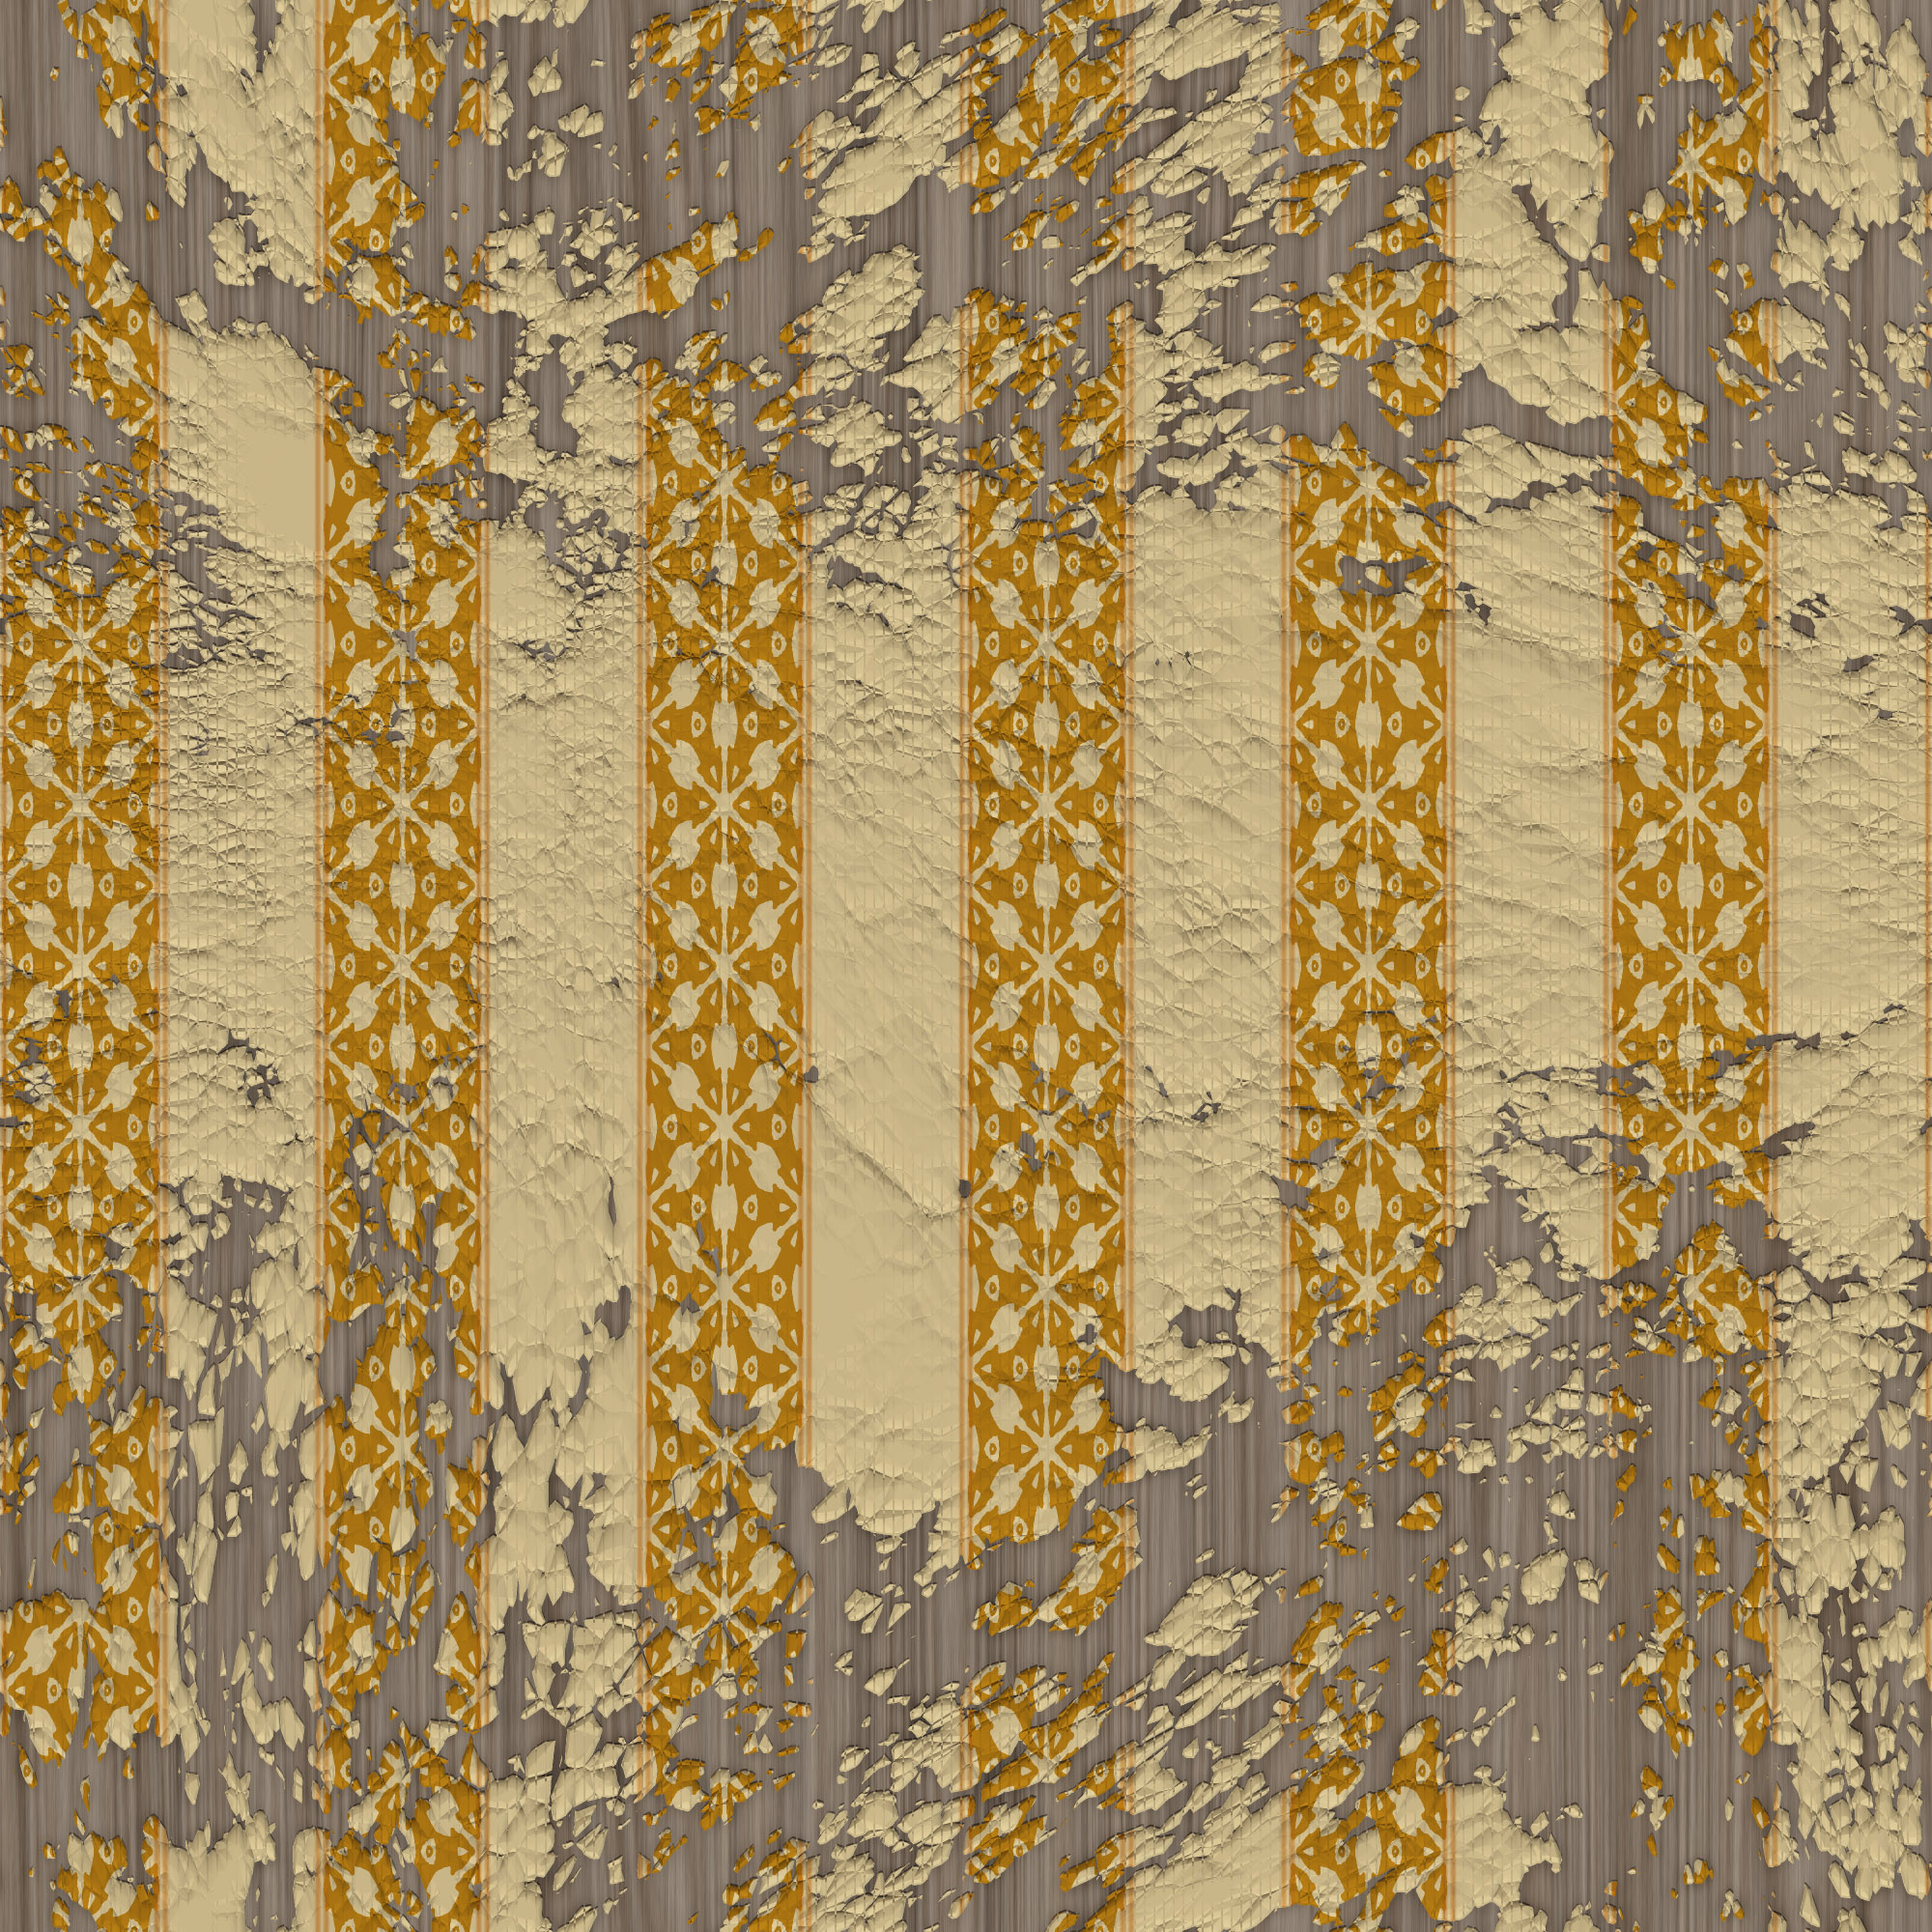 old wallpaper,yellow,brown,tree,pattern,textile